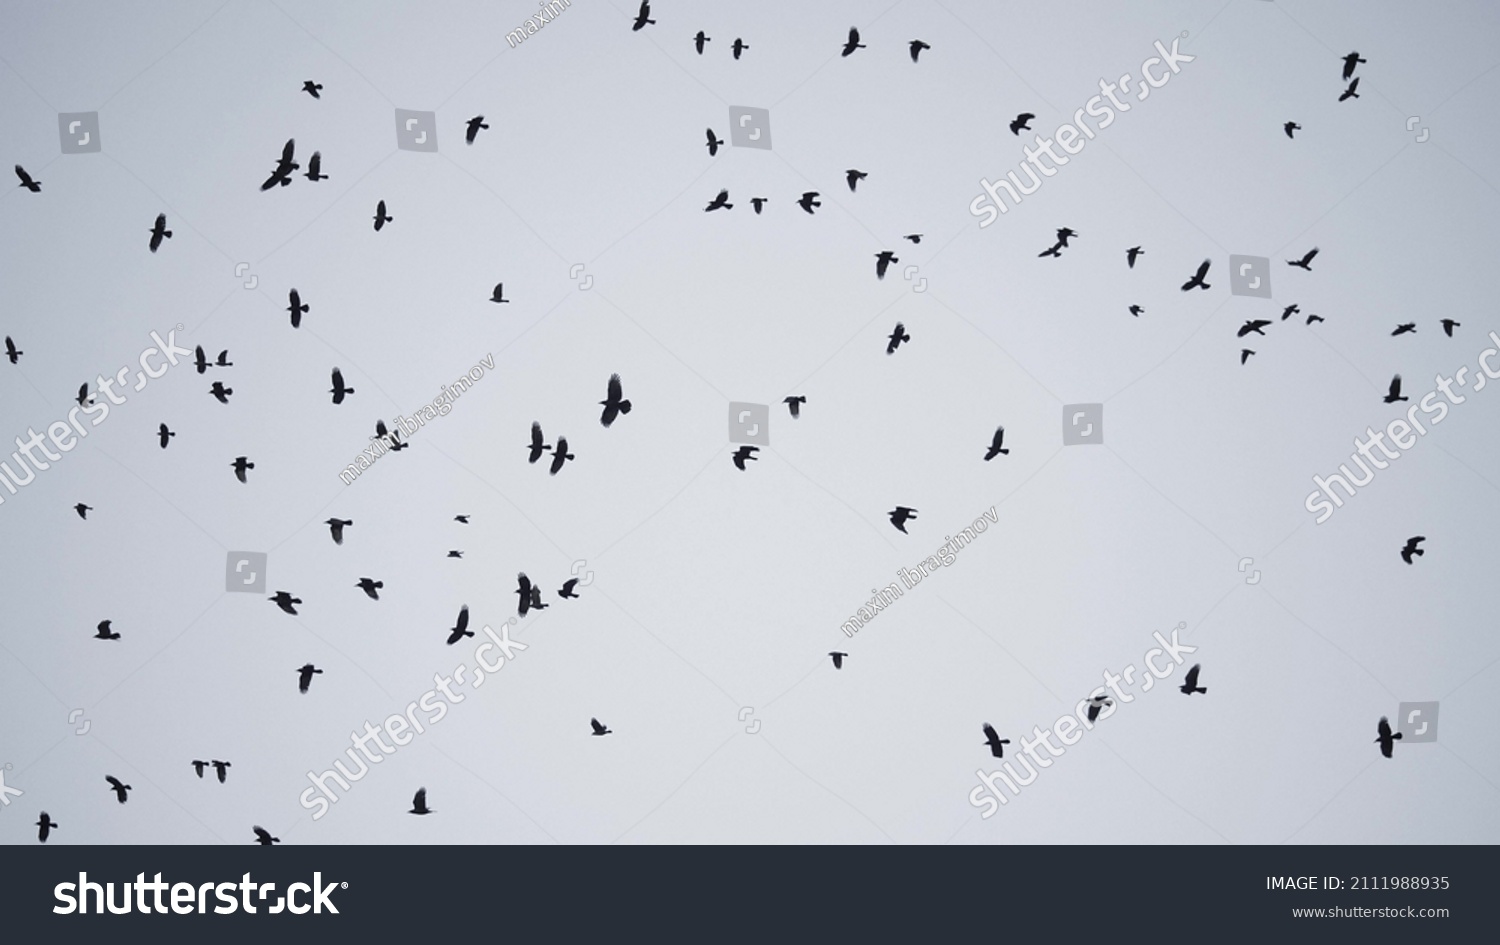 flock of birds flying in the sky crows. chaos of death concept. group of birds flying in the sky. black crows in a group circling against the sky. migration movement fly of birds from warm countries #2111988935